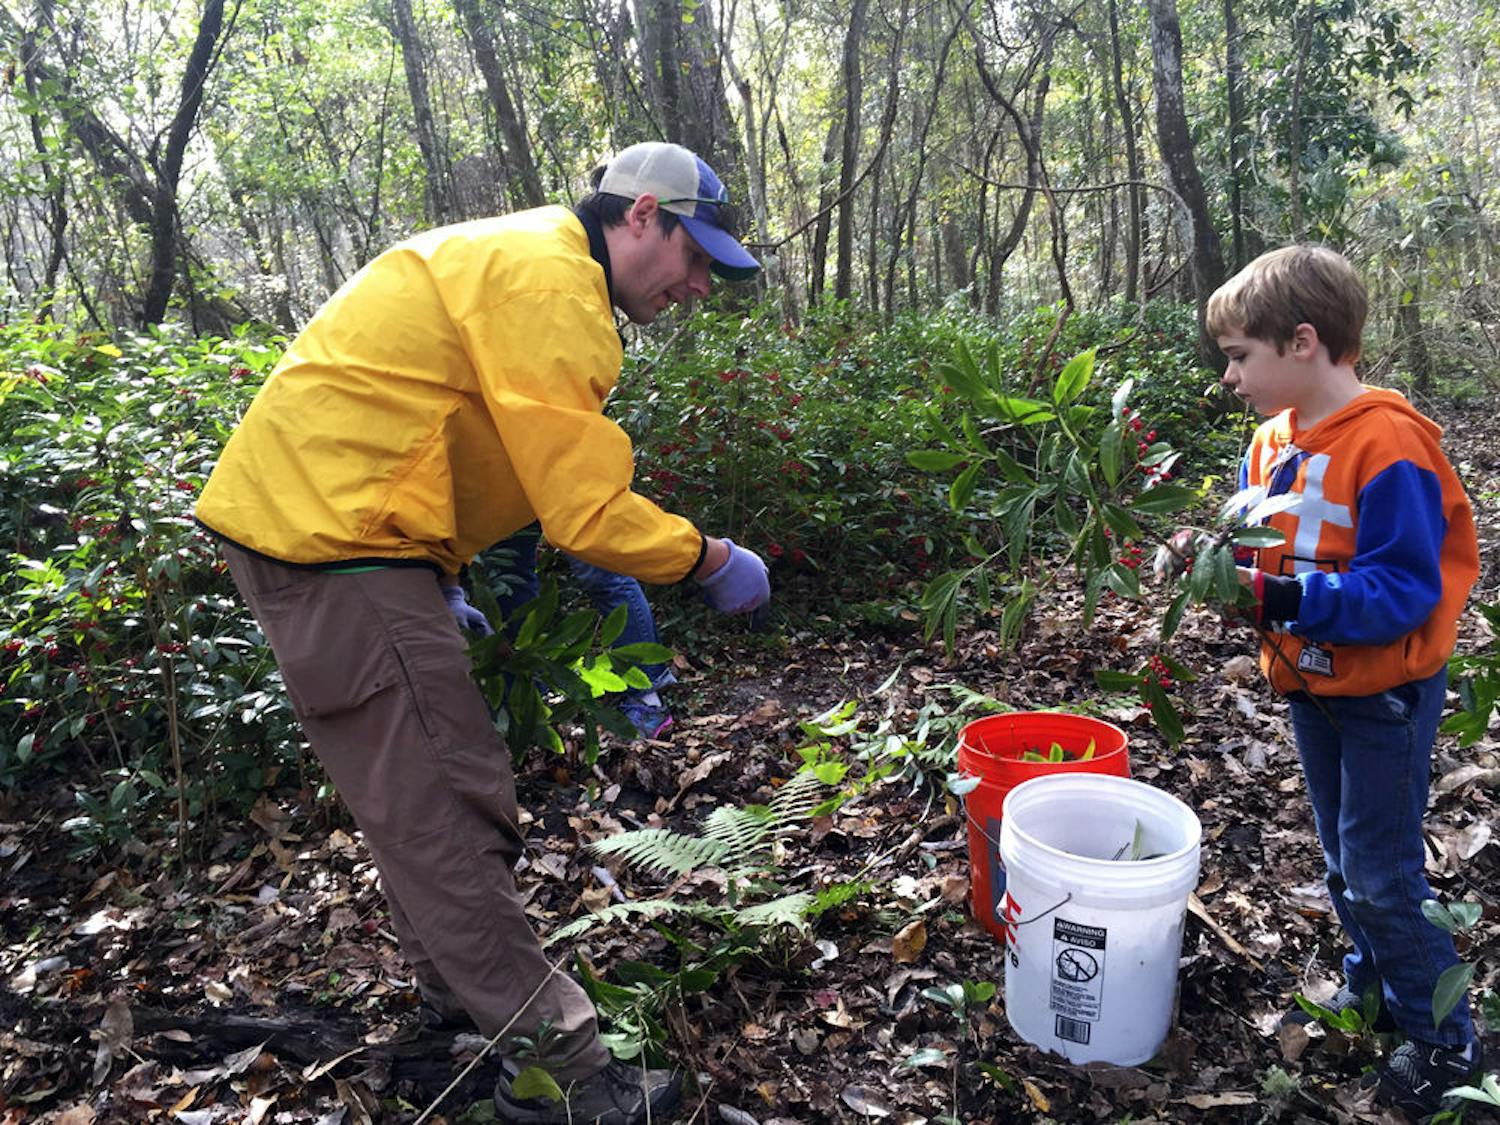 Jacob Tillmann, 38, removes coral ardisia, an invasive plant species, with his son Grant Tillmann, 6, from the Evergreen Cemetery during the Great Invader Raider Rally event Saturday morning. “Grant can look at a species and say, ‘Hey, that's a bad plant,’” Tillmann said. “And that's because of these events.”